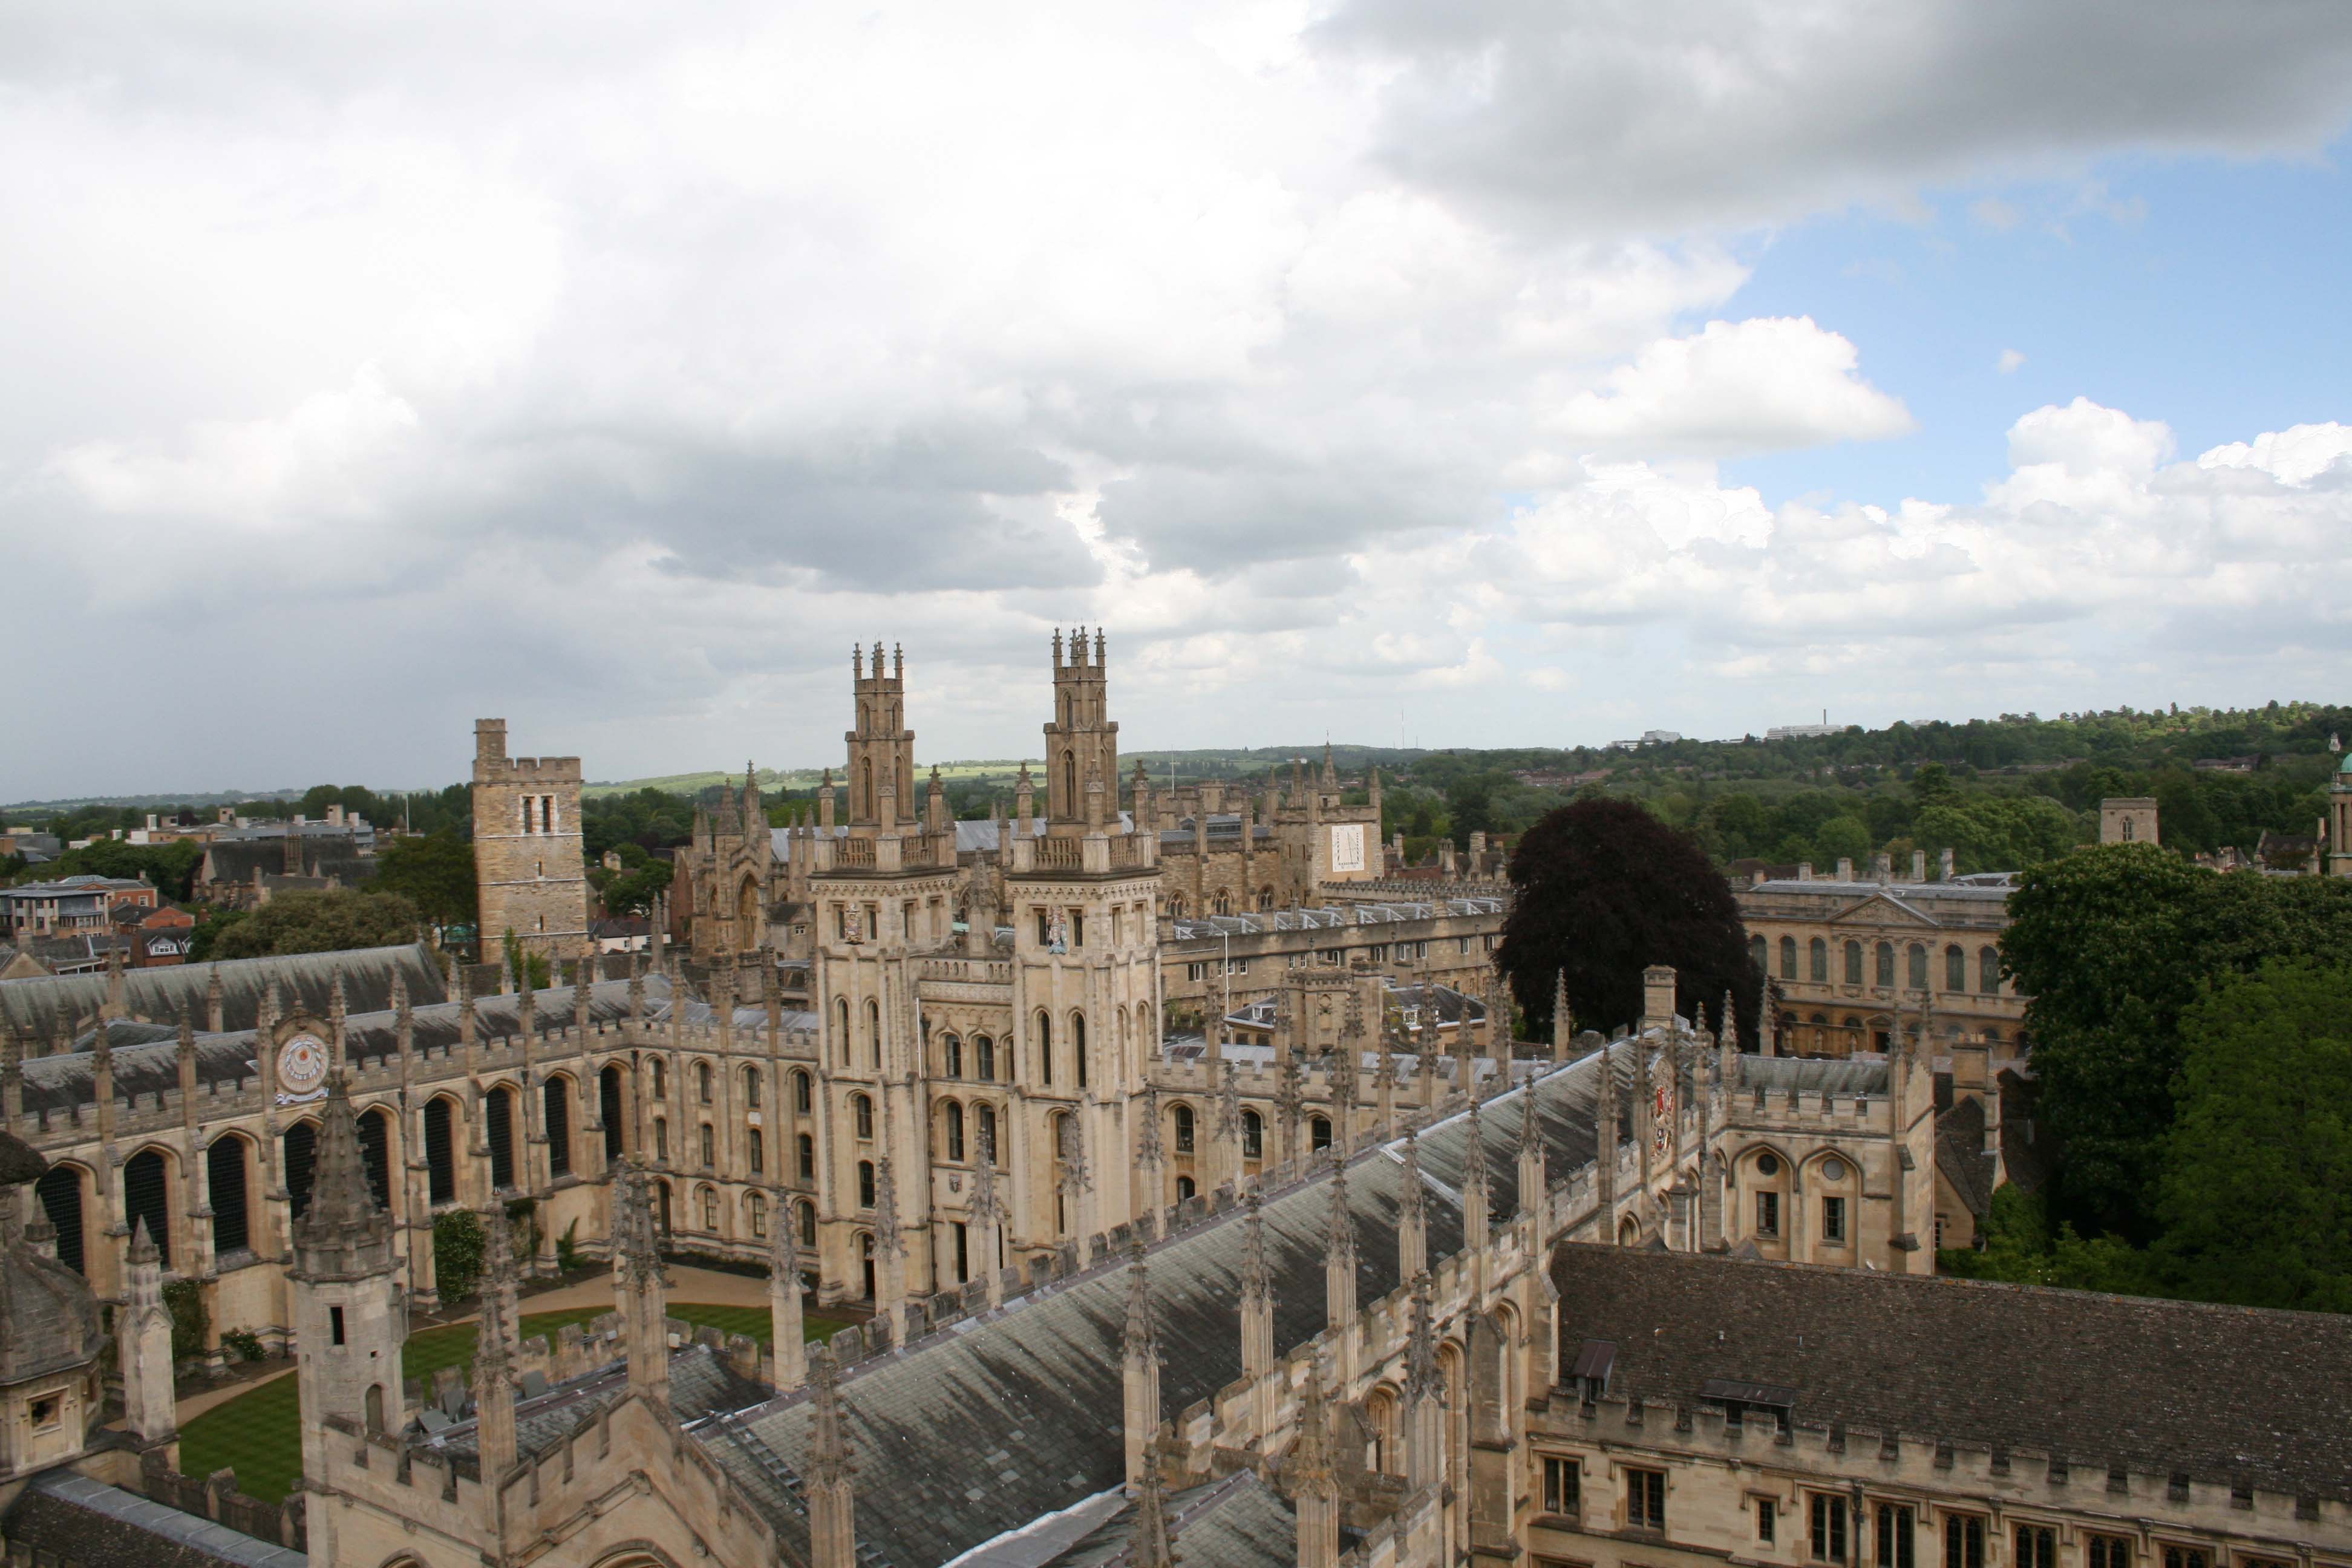 An Oxford college